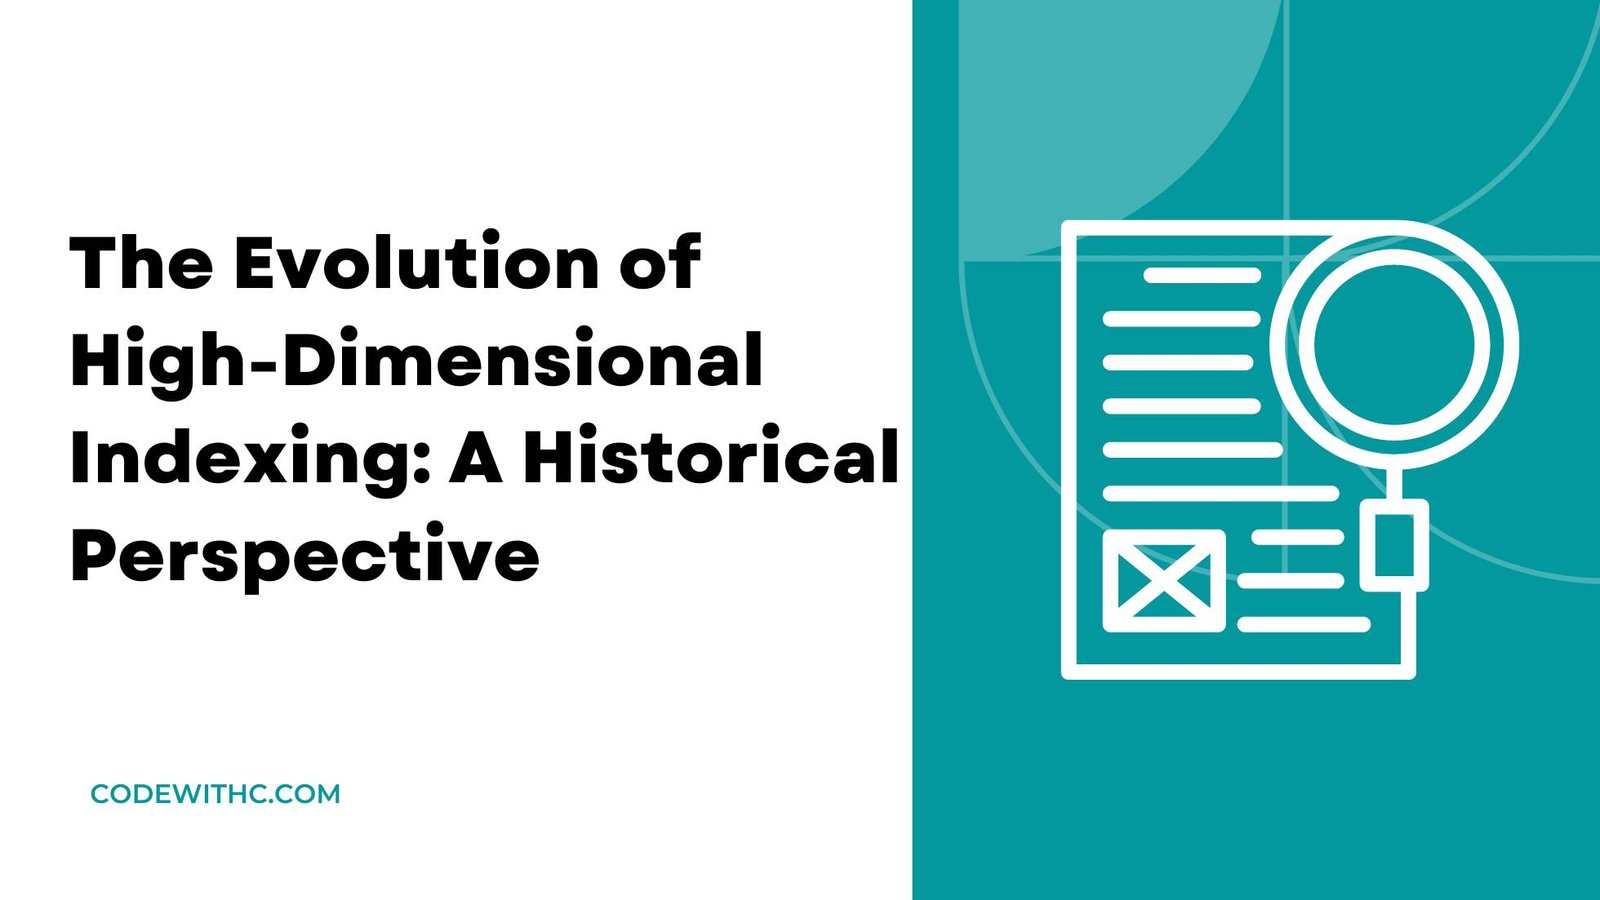 The Evolution of High-Dimensional Indexing: A Historical Perspective